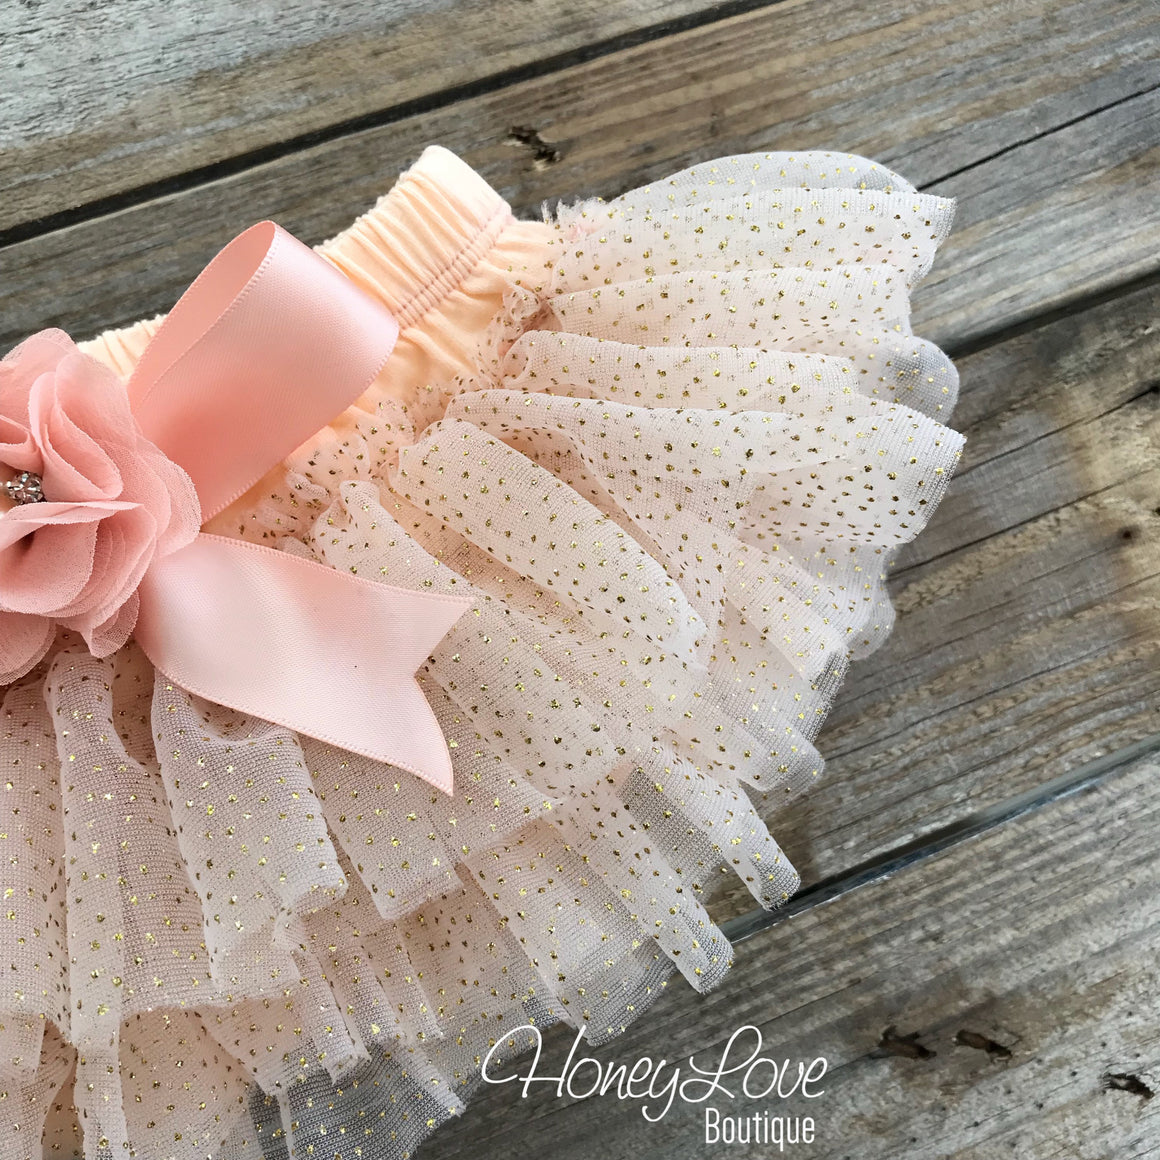 Peach and Gold glitter tutu skirt bloomers and tiara headband - embellished bloomers - HoneyLoveBoutique